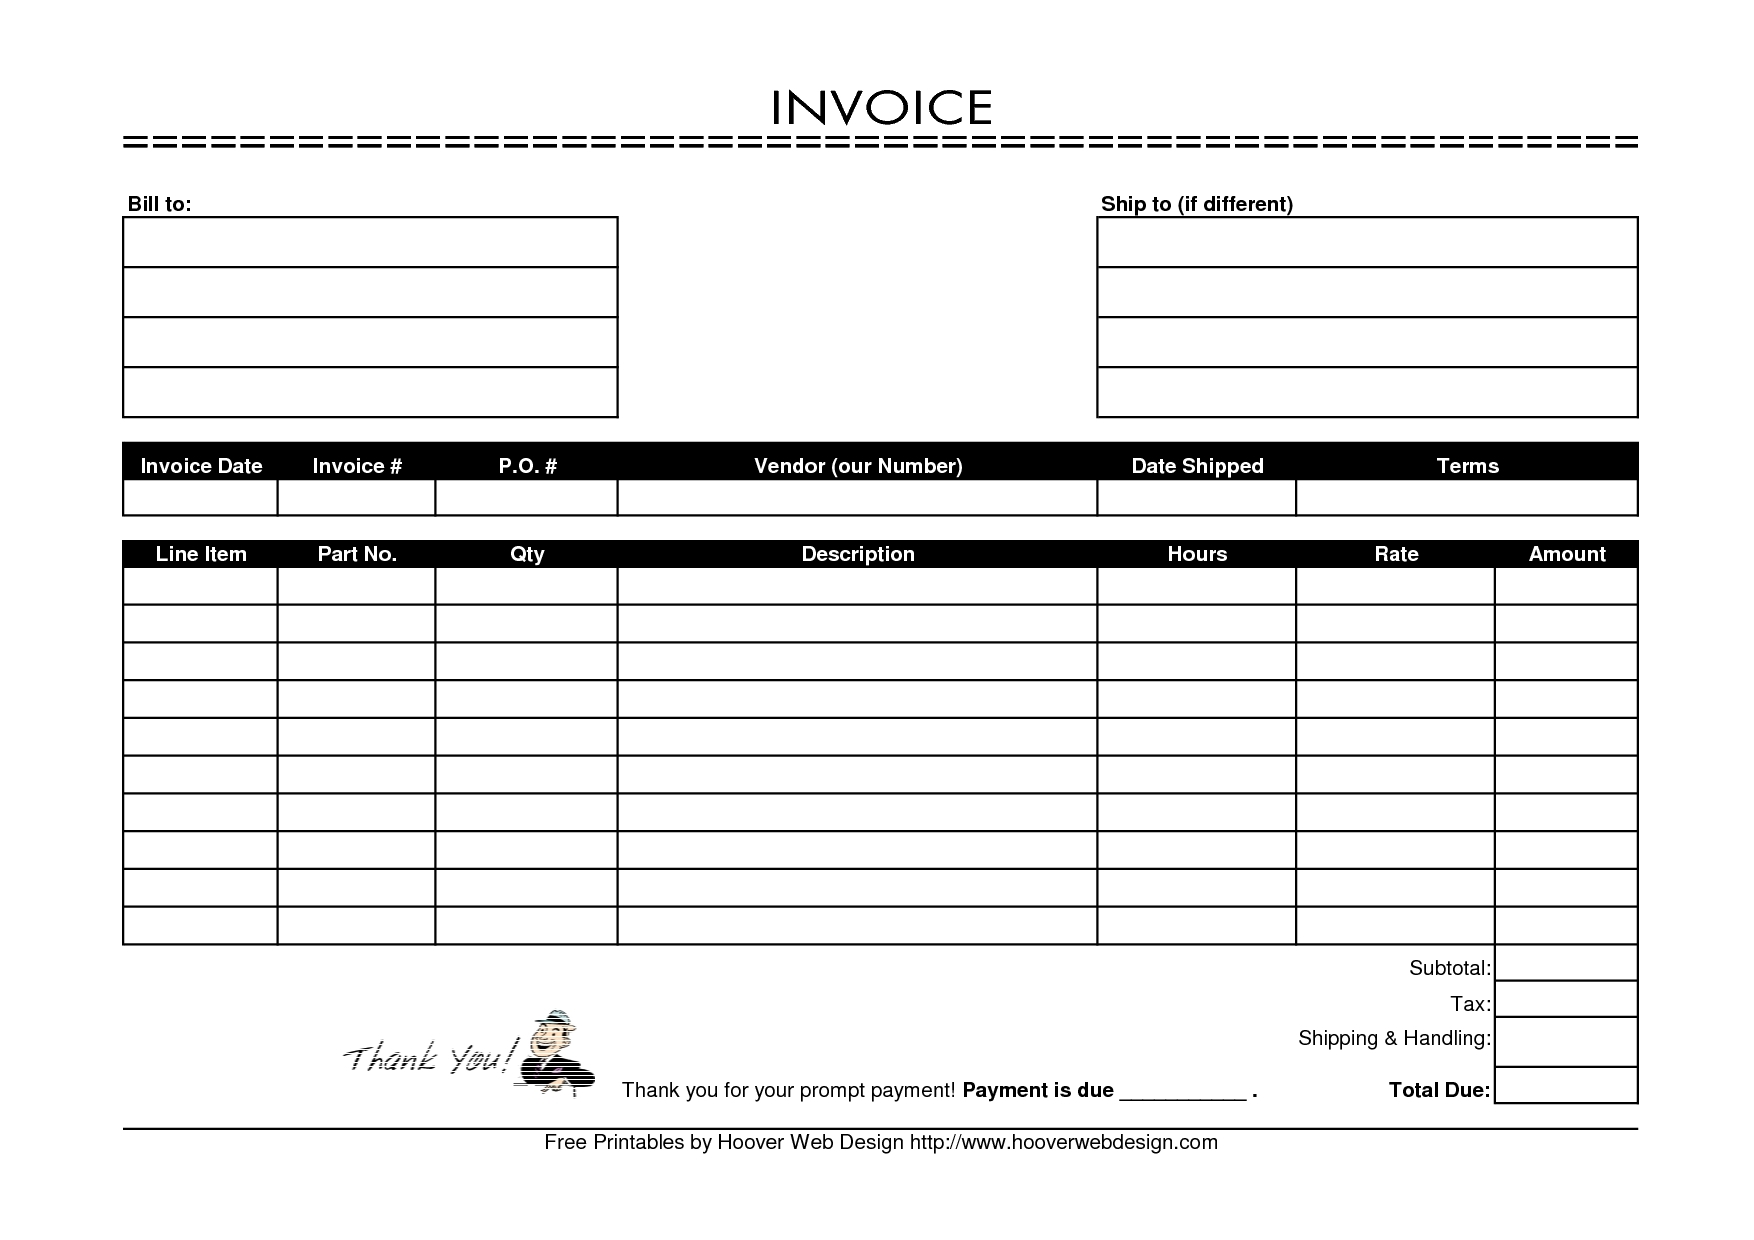 free printable invoice forms free blank invoices printable letter template microsoft word 1754 X 1240